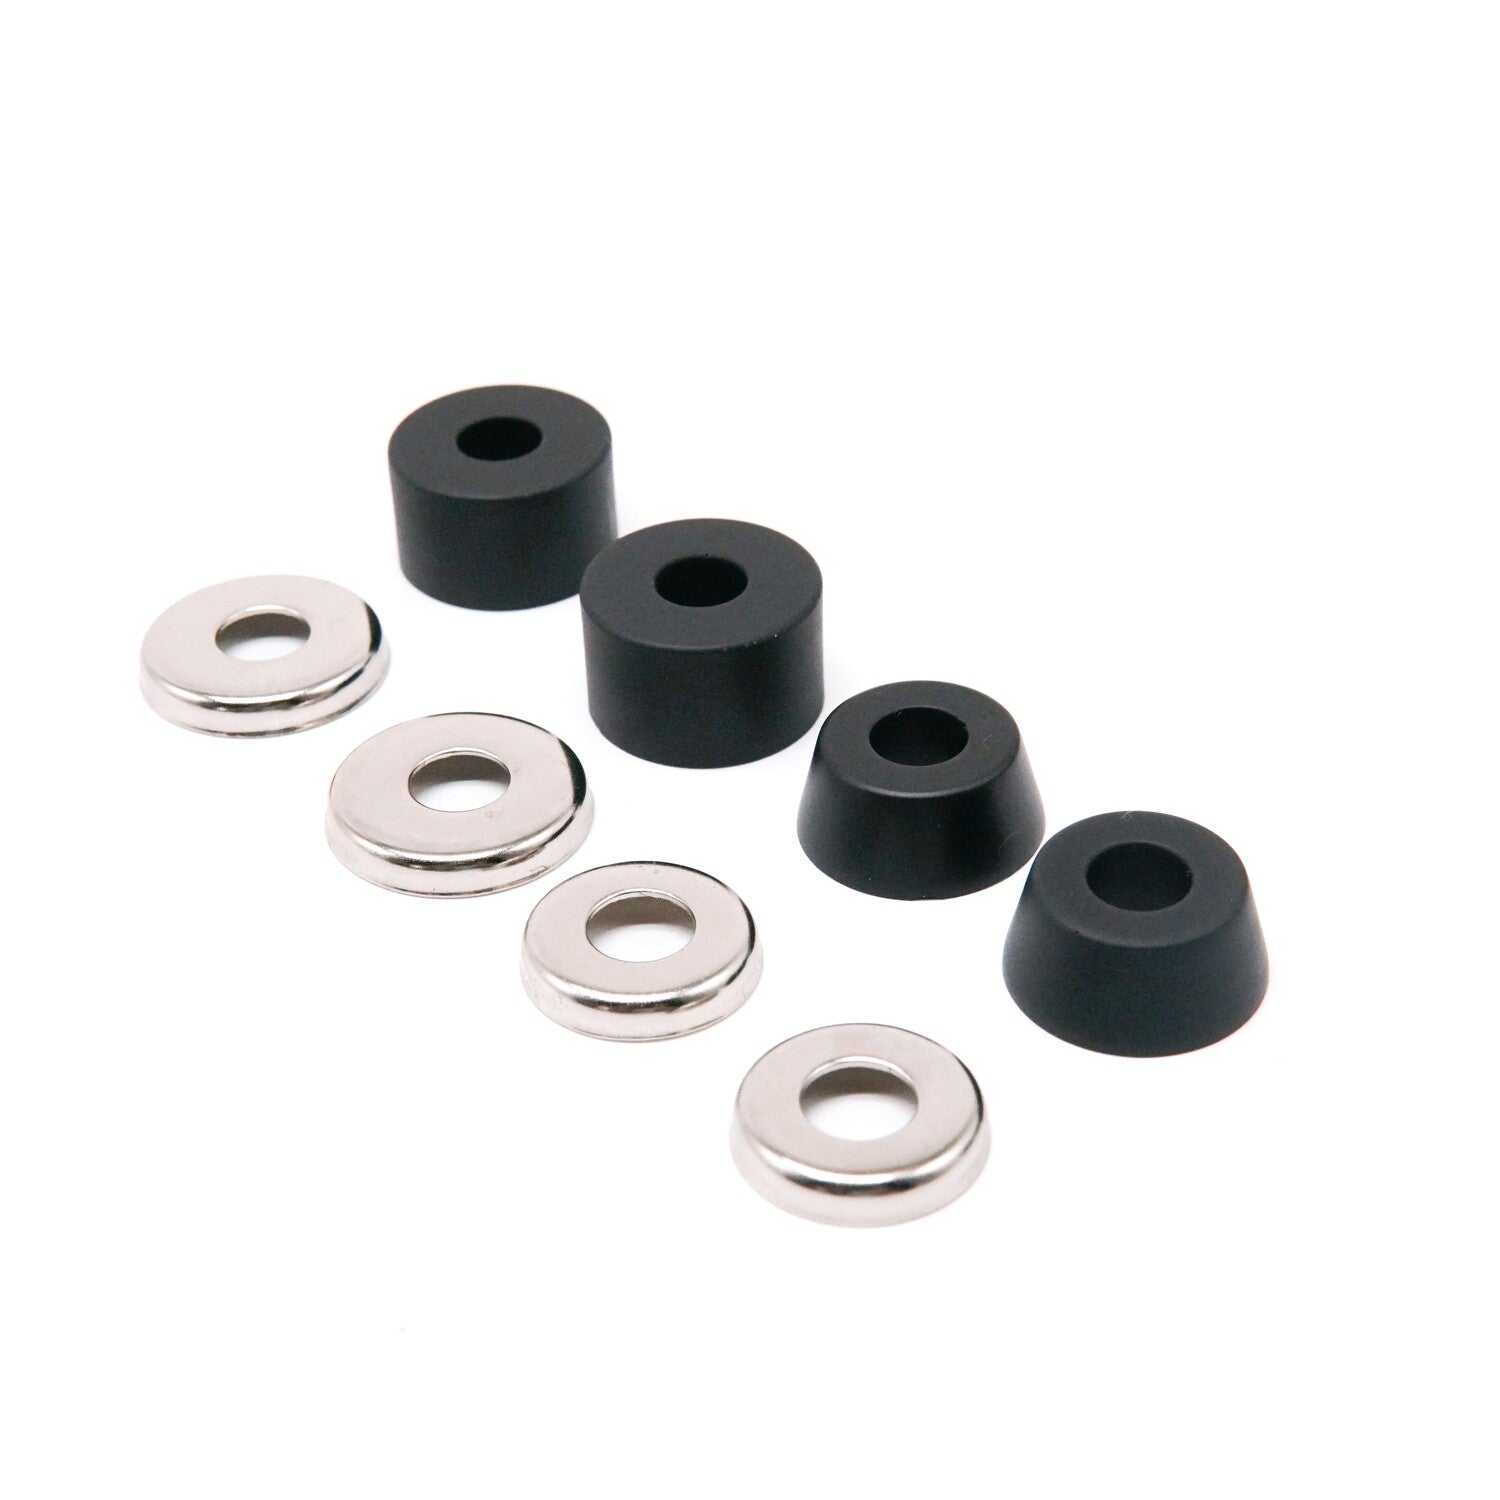 Large Rubber Grommets and Bushings 